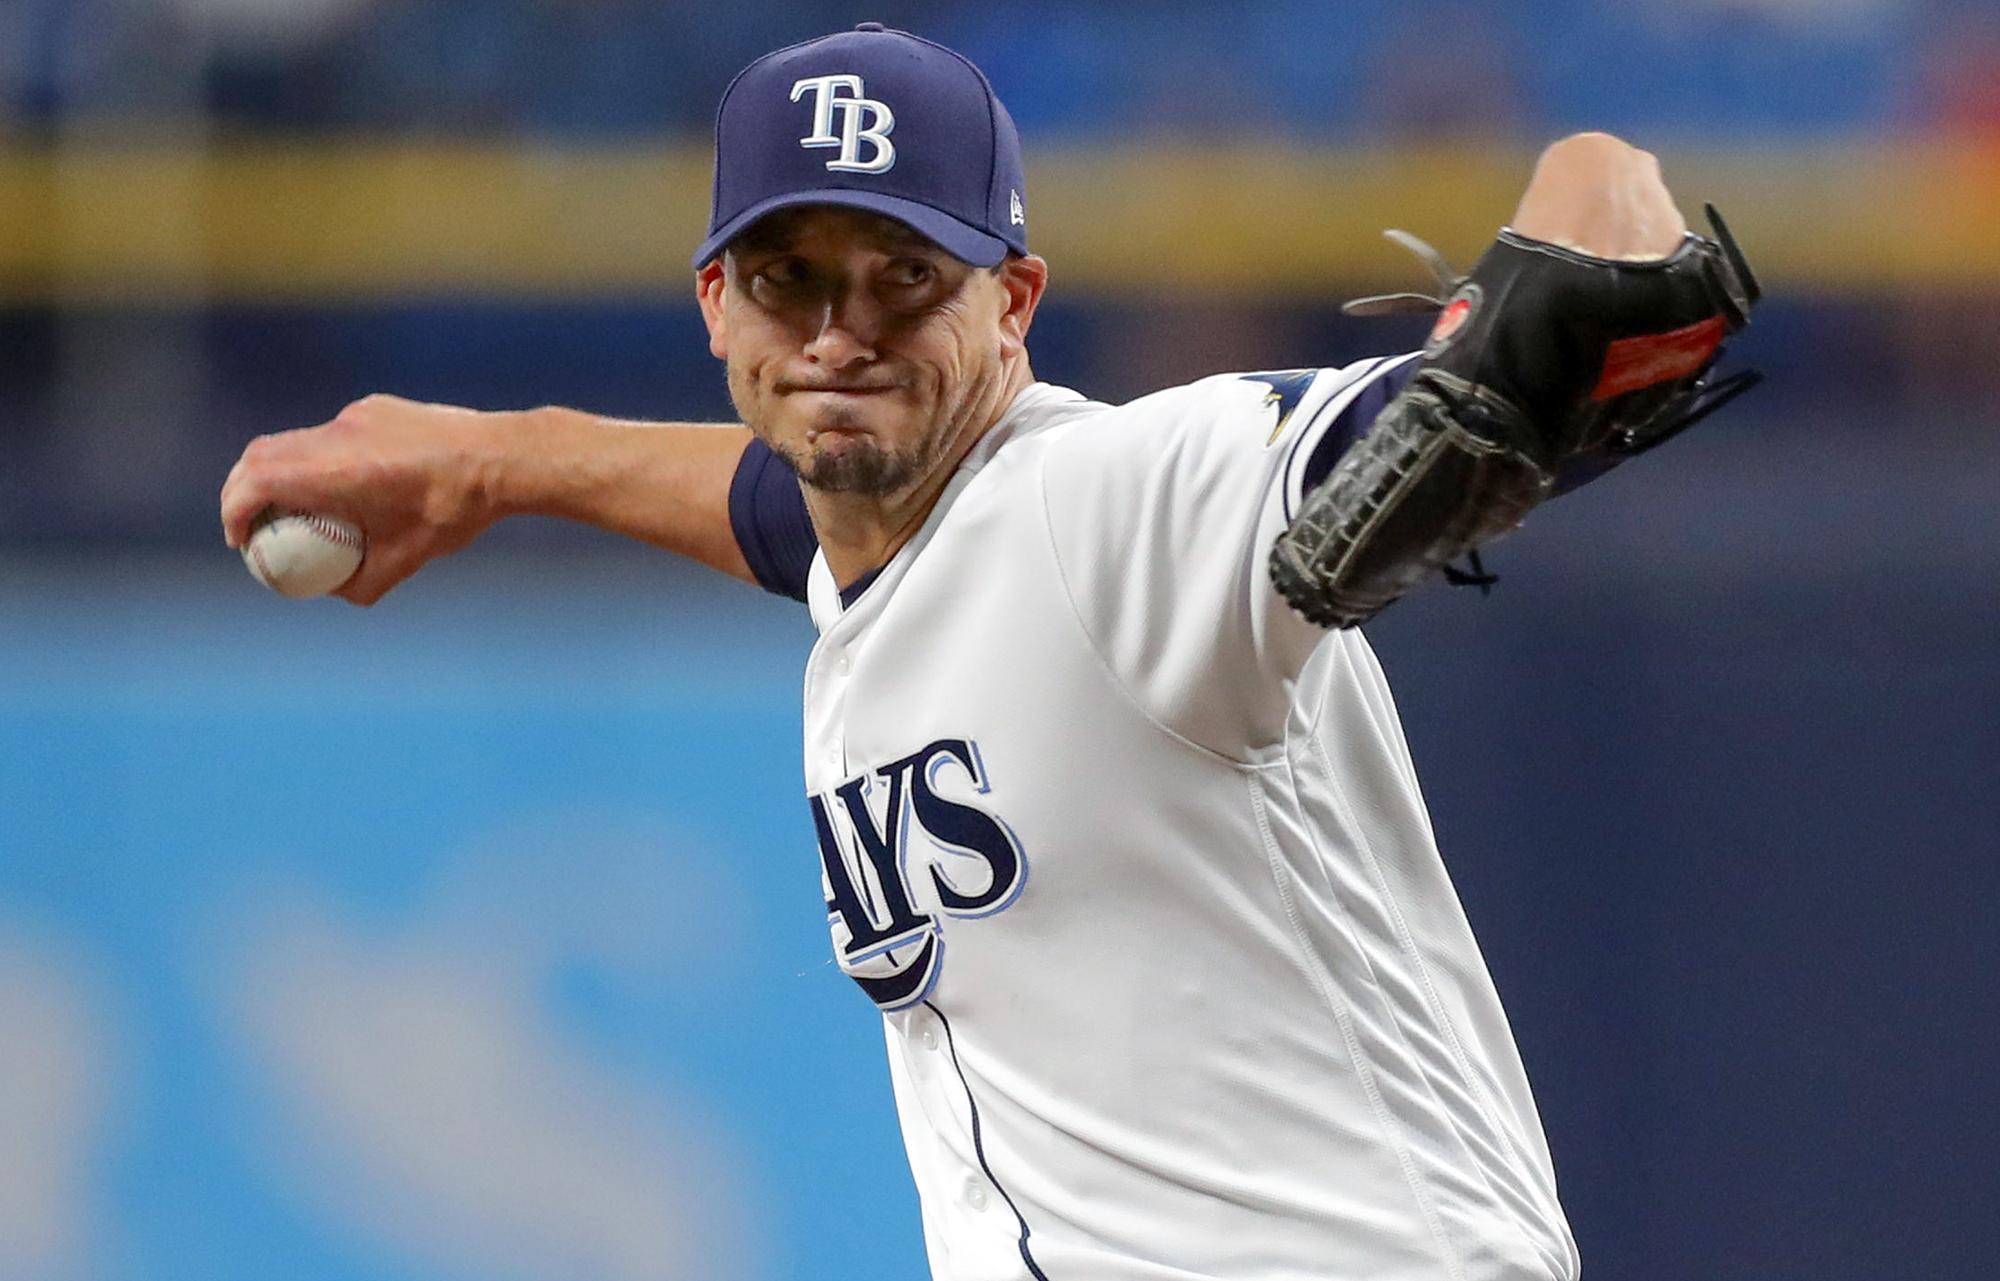 Charlie Morton outduels Gerrit Cole as Rays down Astros